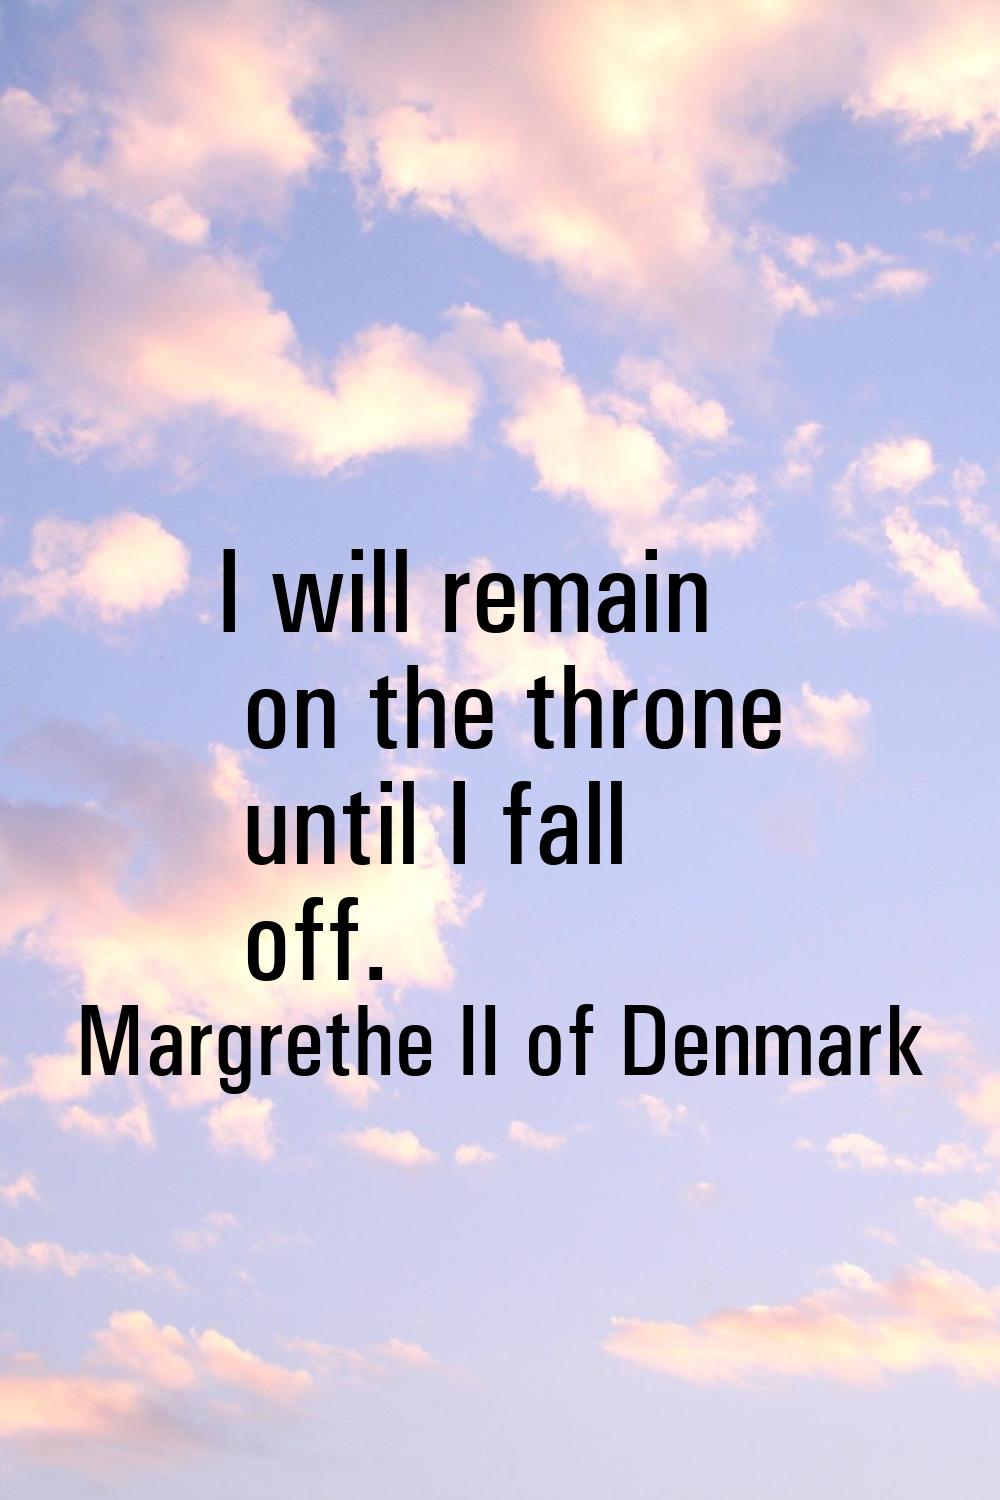 I will remain on the throne until I fall off.